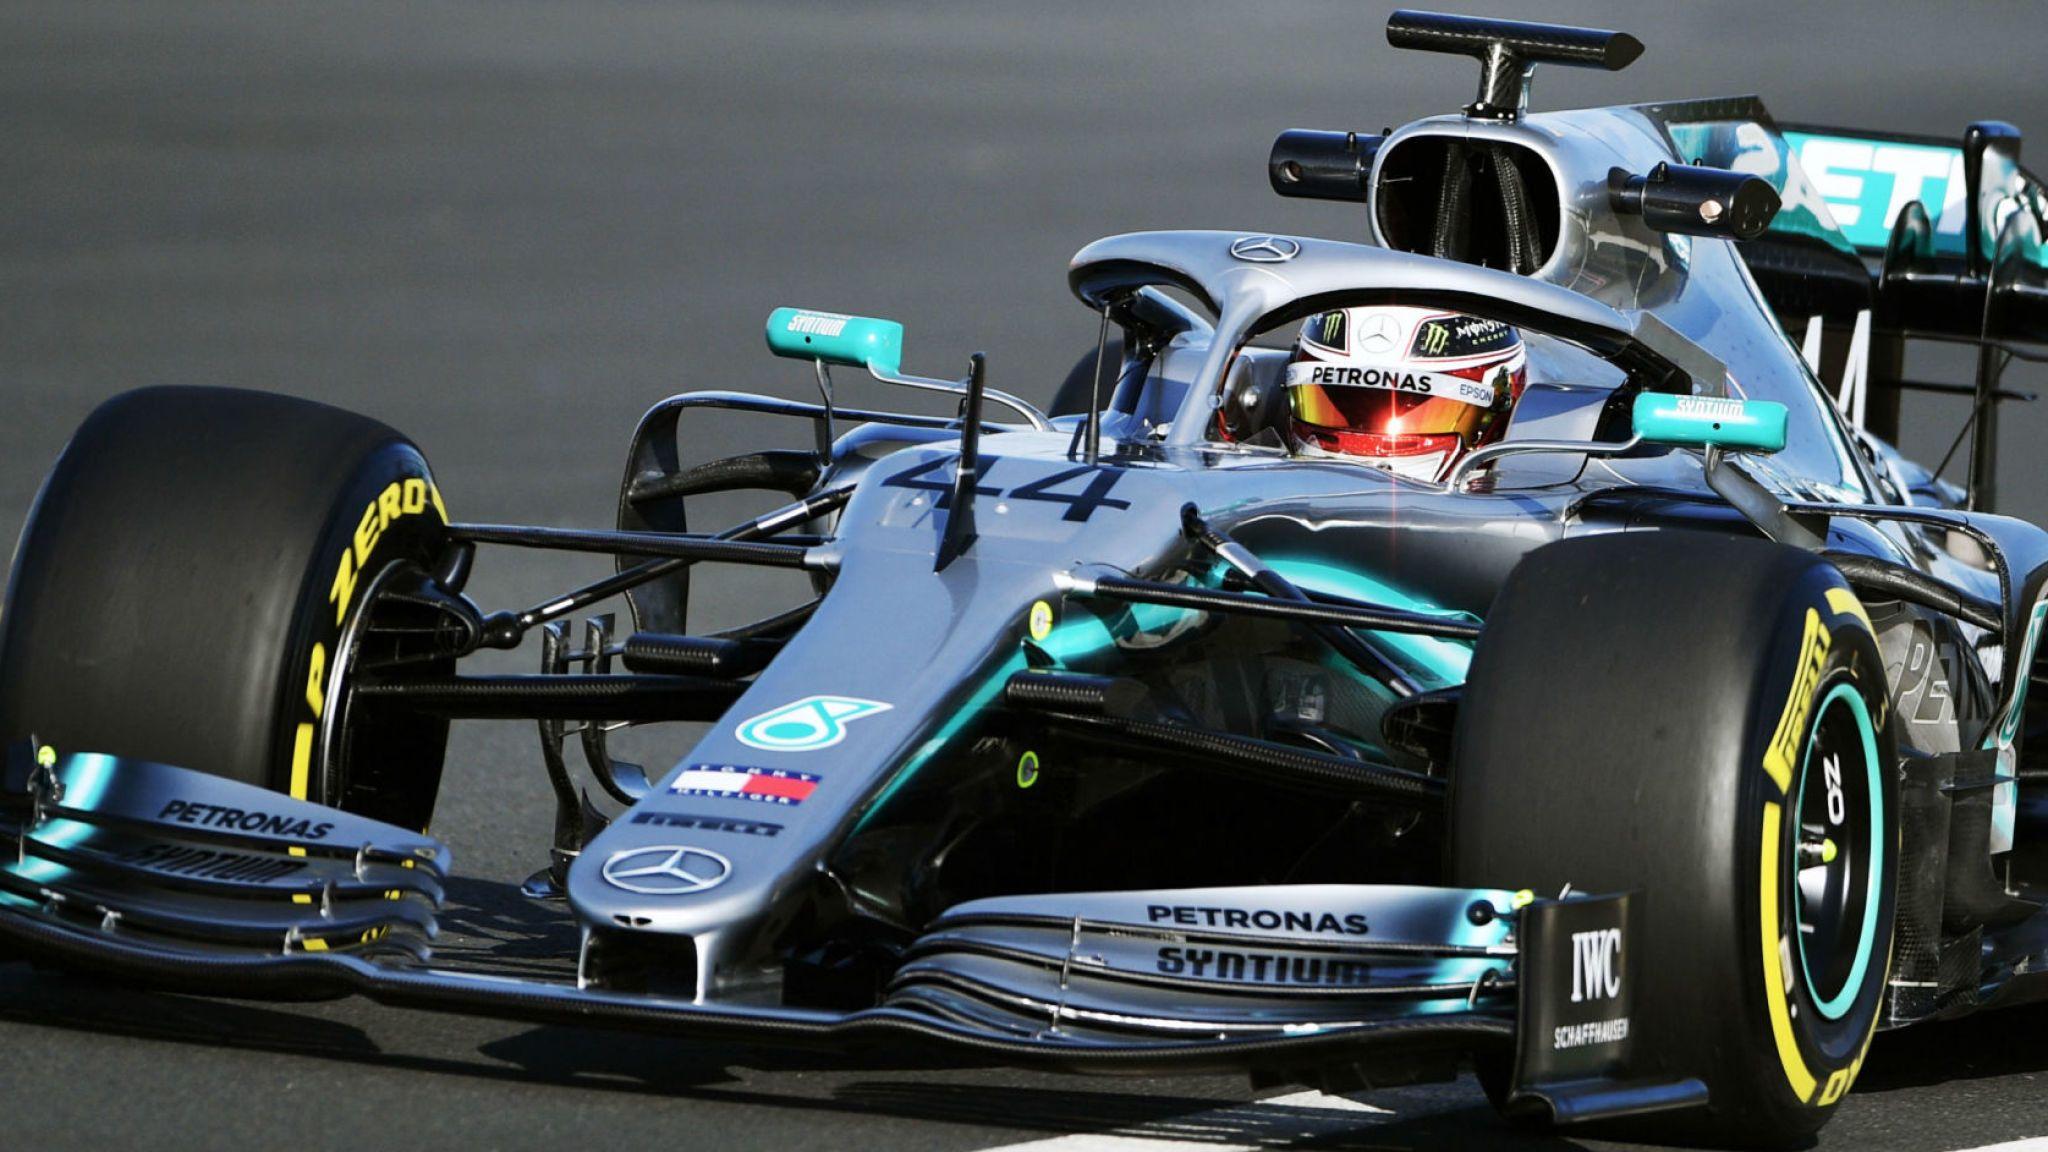 F1 2019: Lewis Hamilton warns he is 'ready to attack'